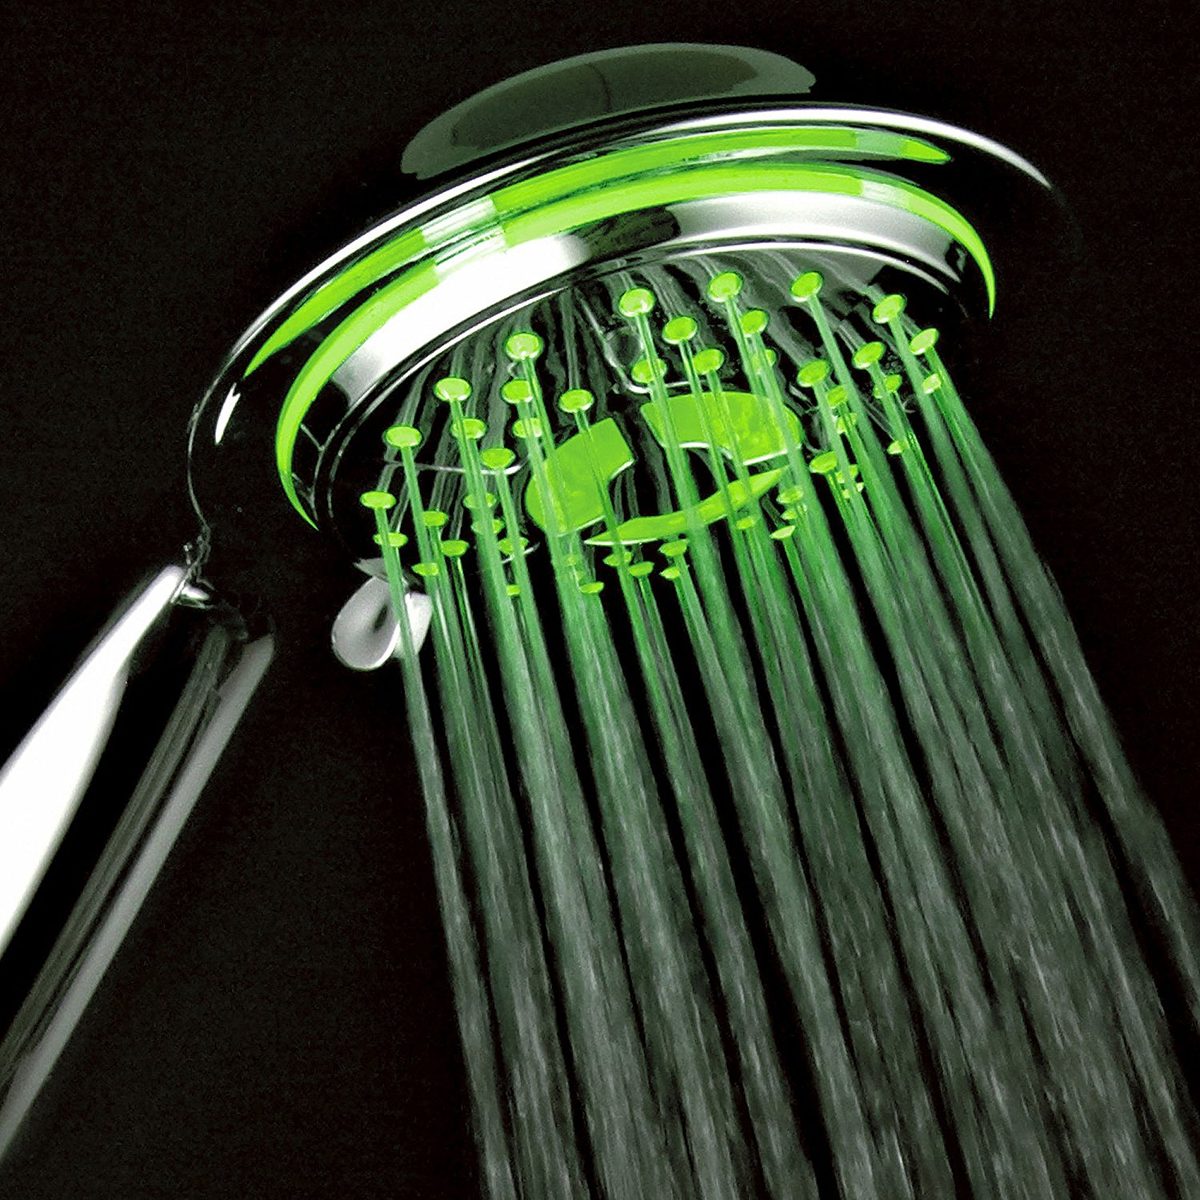 PowerSpa 4-Inch Handheld LED Showerhead with Pressure-Boost Nozzle Technology